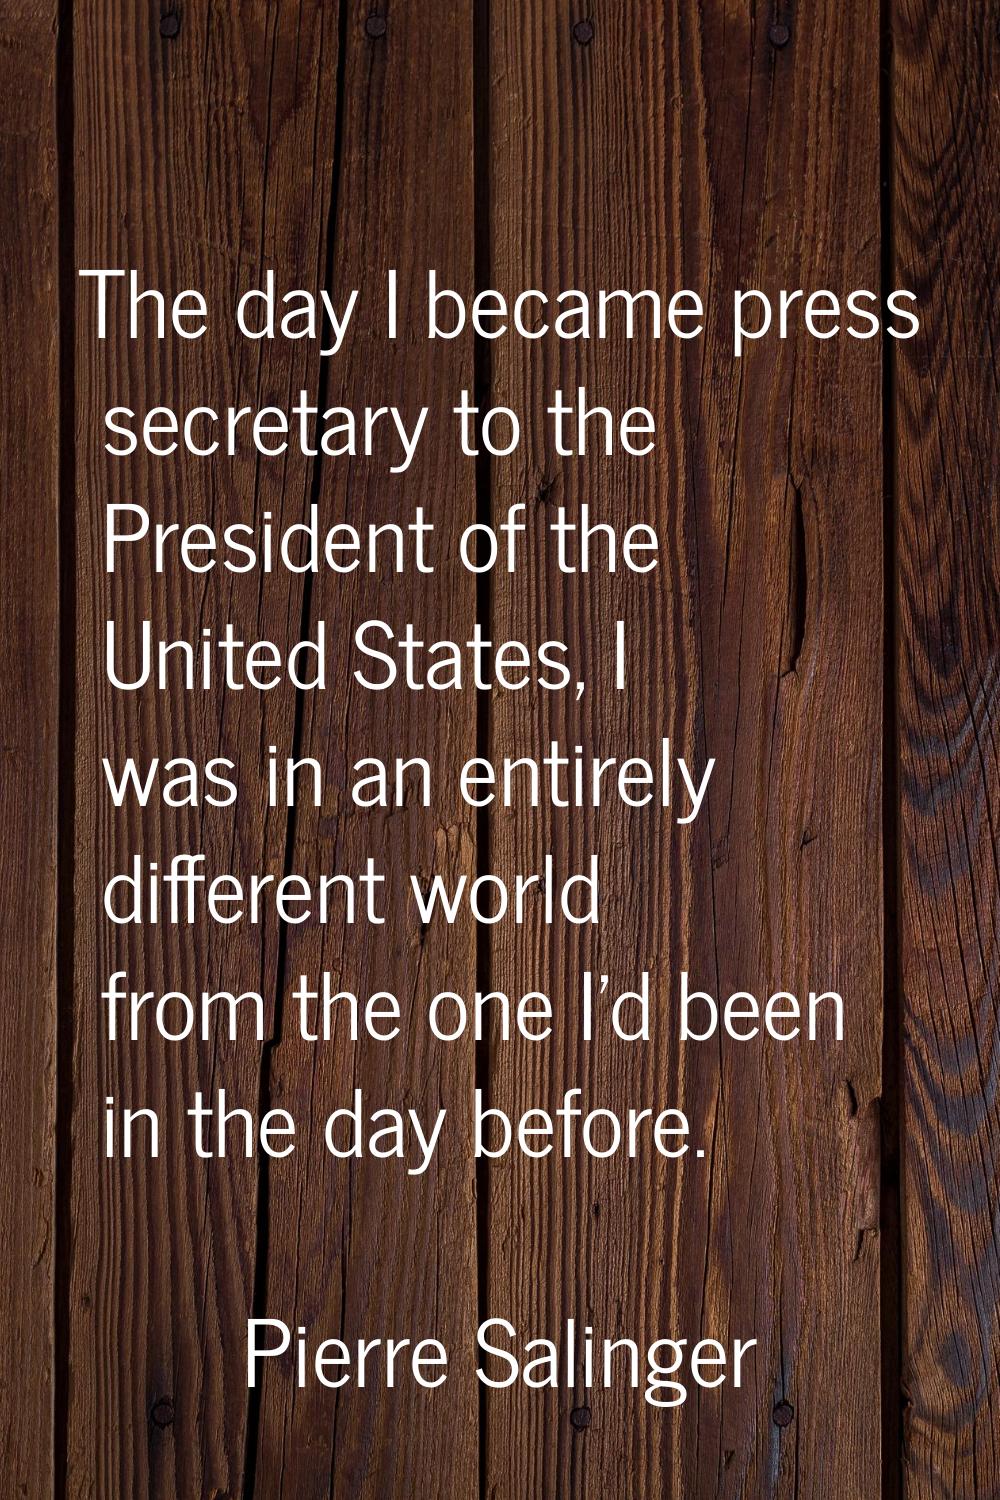 The day I became press secretary to the President of the United States, I was in an entirely differ